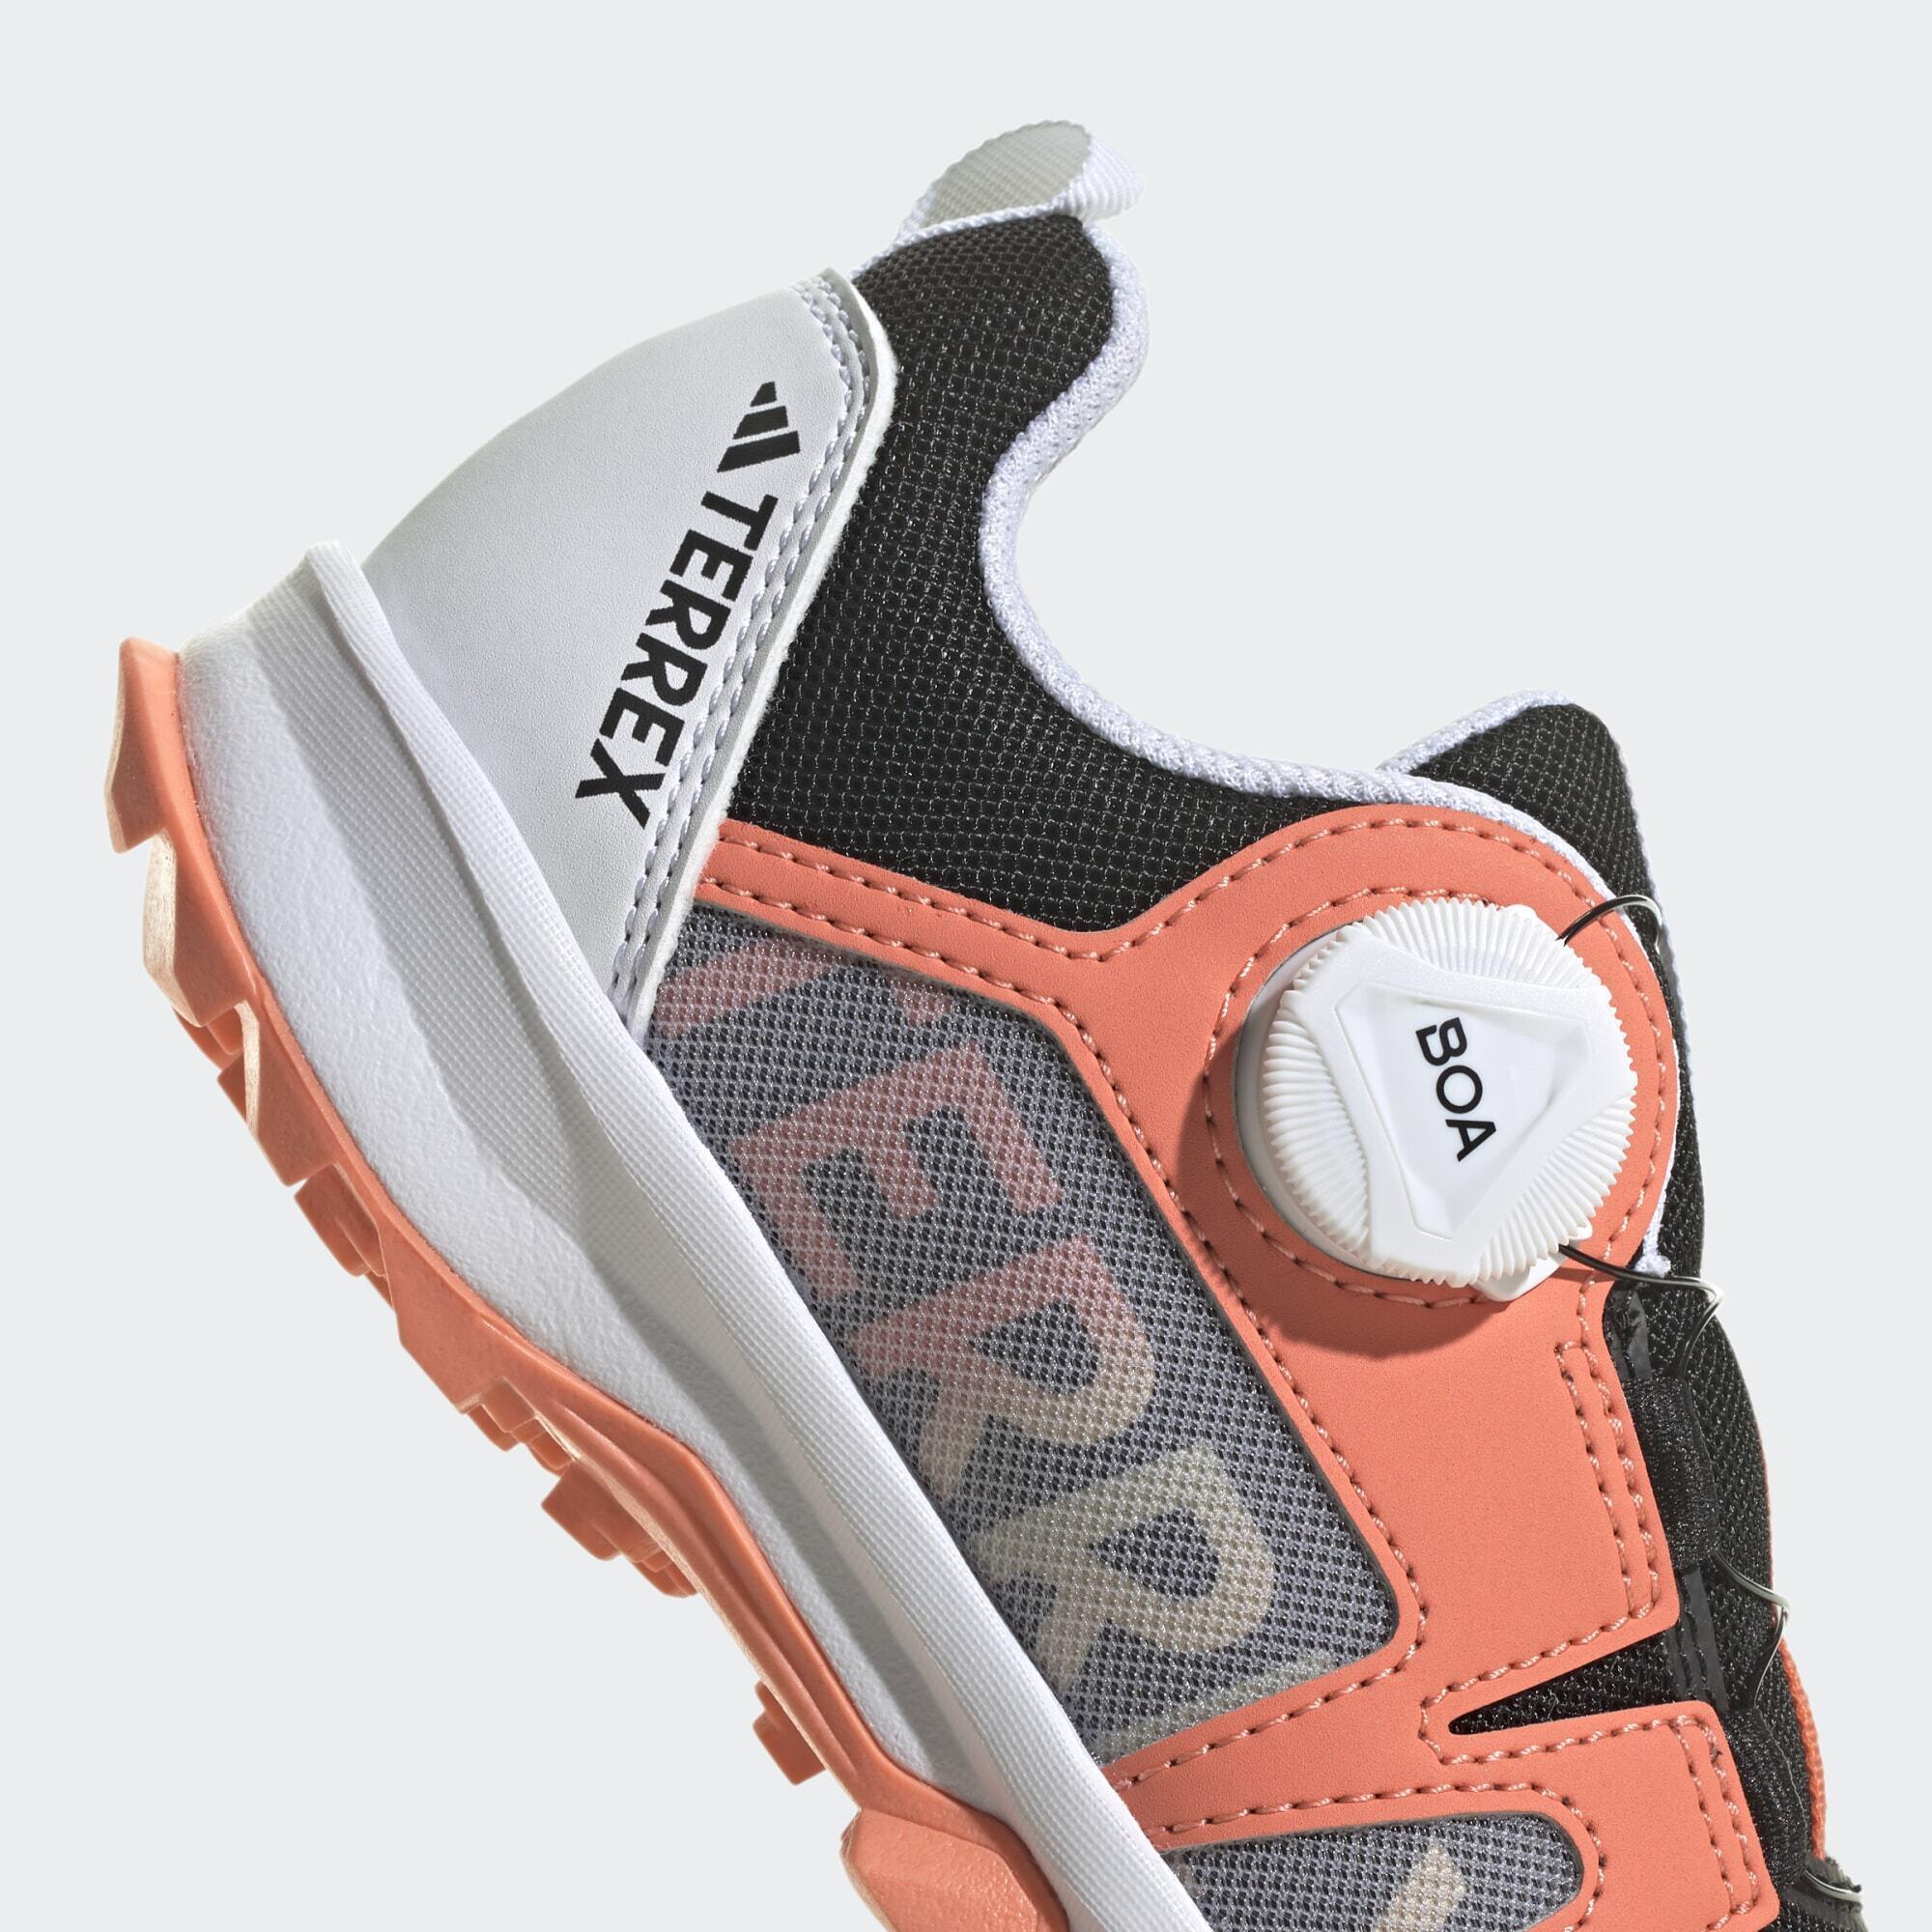 Terrex Agravic BOA Trail Running Shoes 6/7